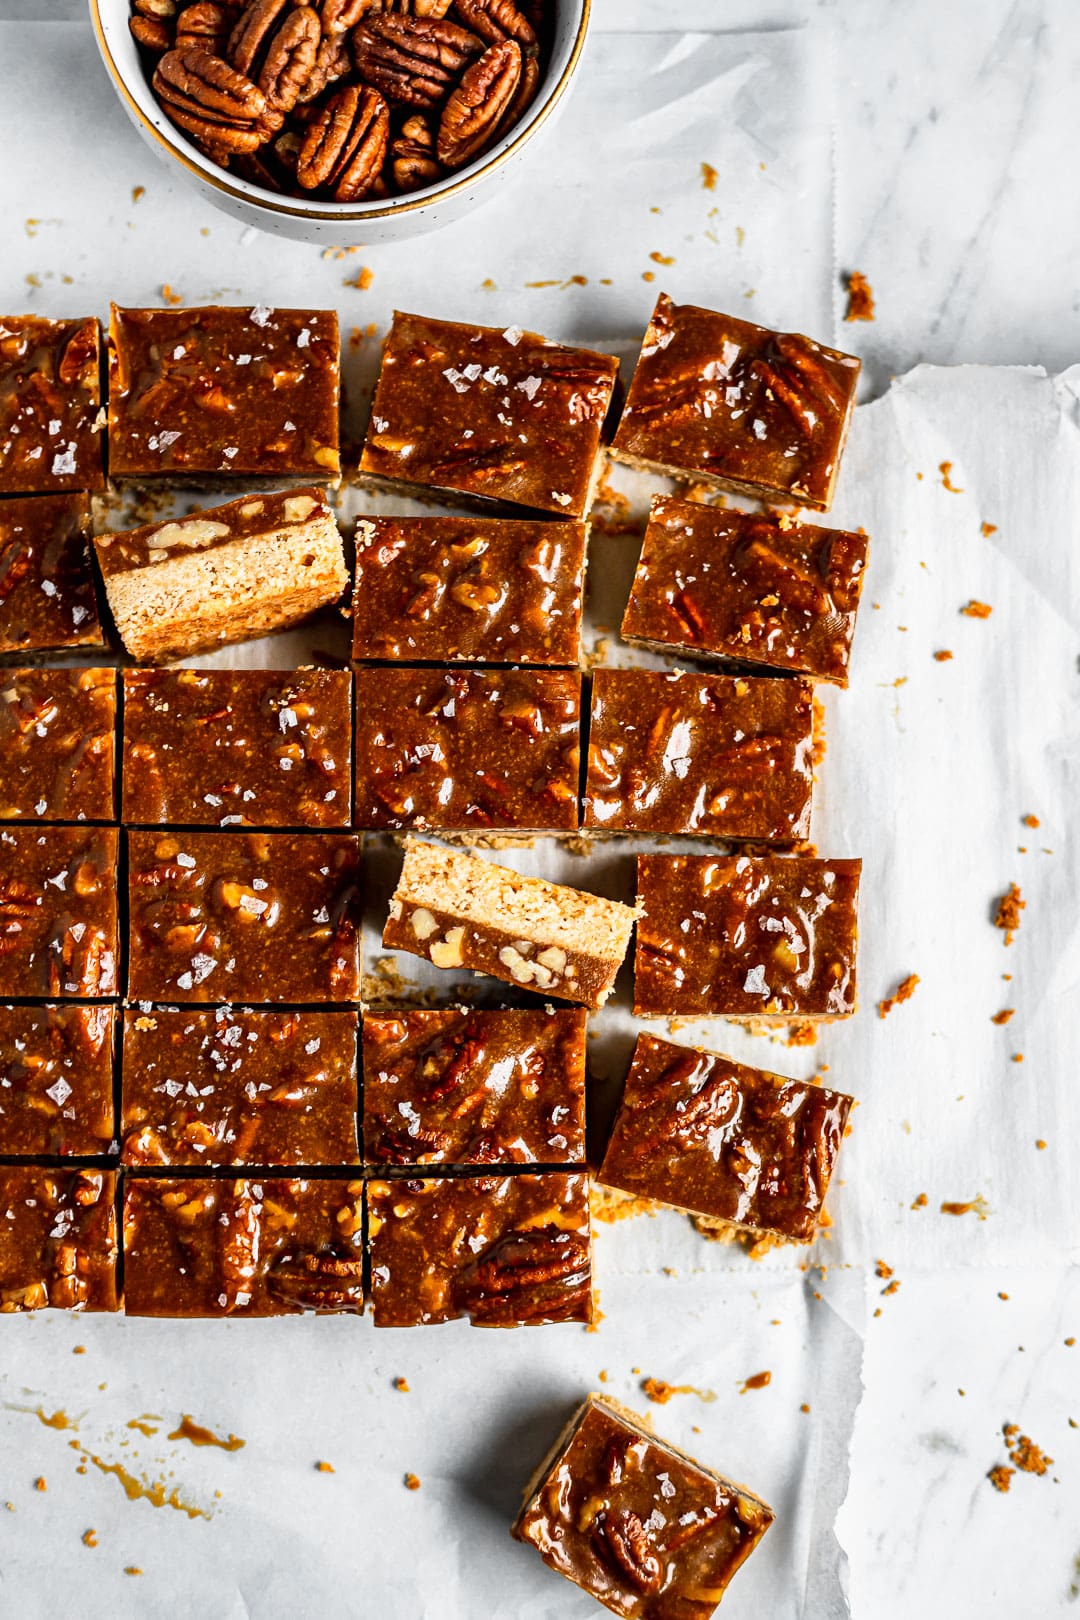 Slices of pecan bars on white parchment paper with a bowl of pecans nearby